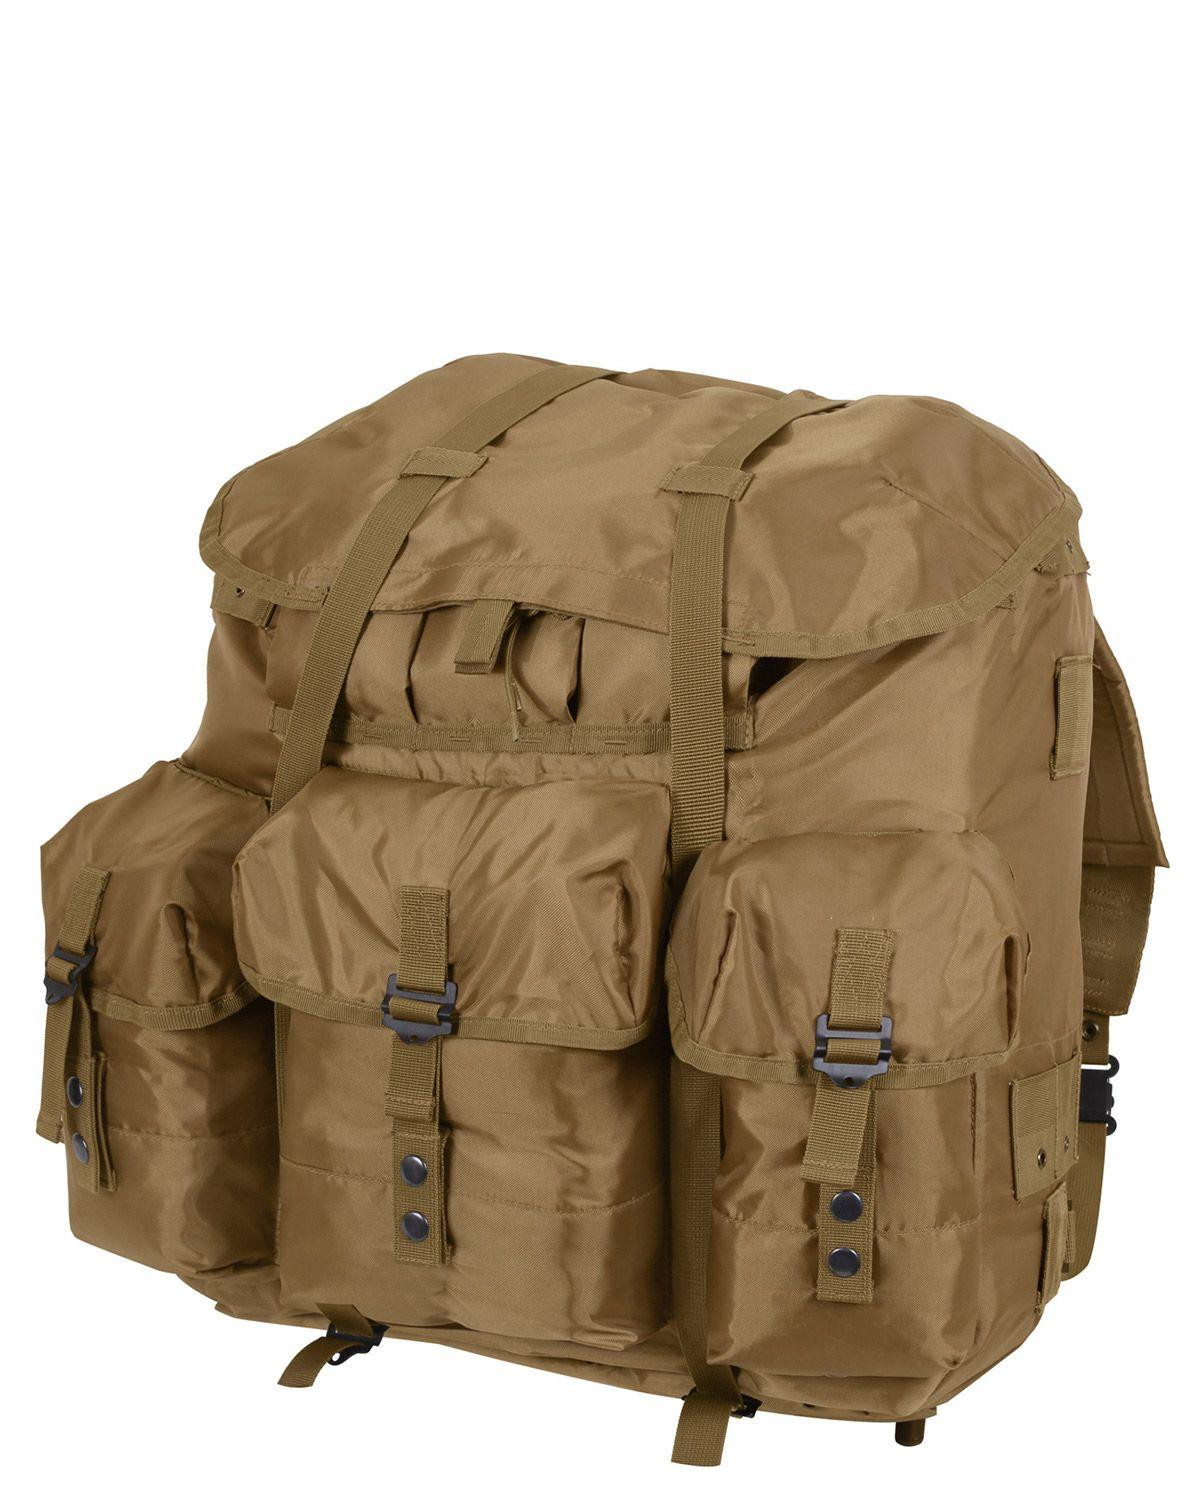 Rothco ALICE Rygsæk - 130 liter (Coyote Brun, One Size)